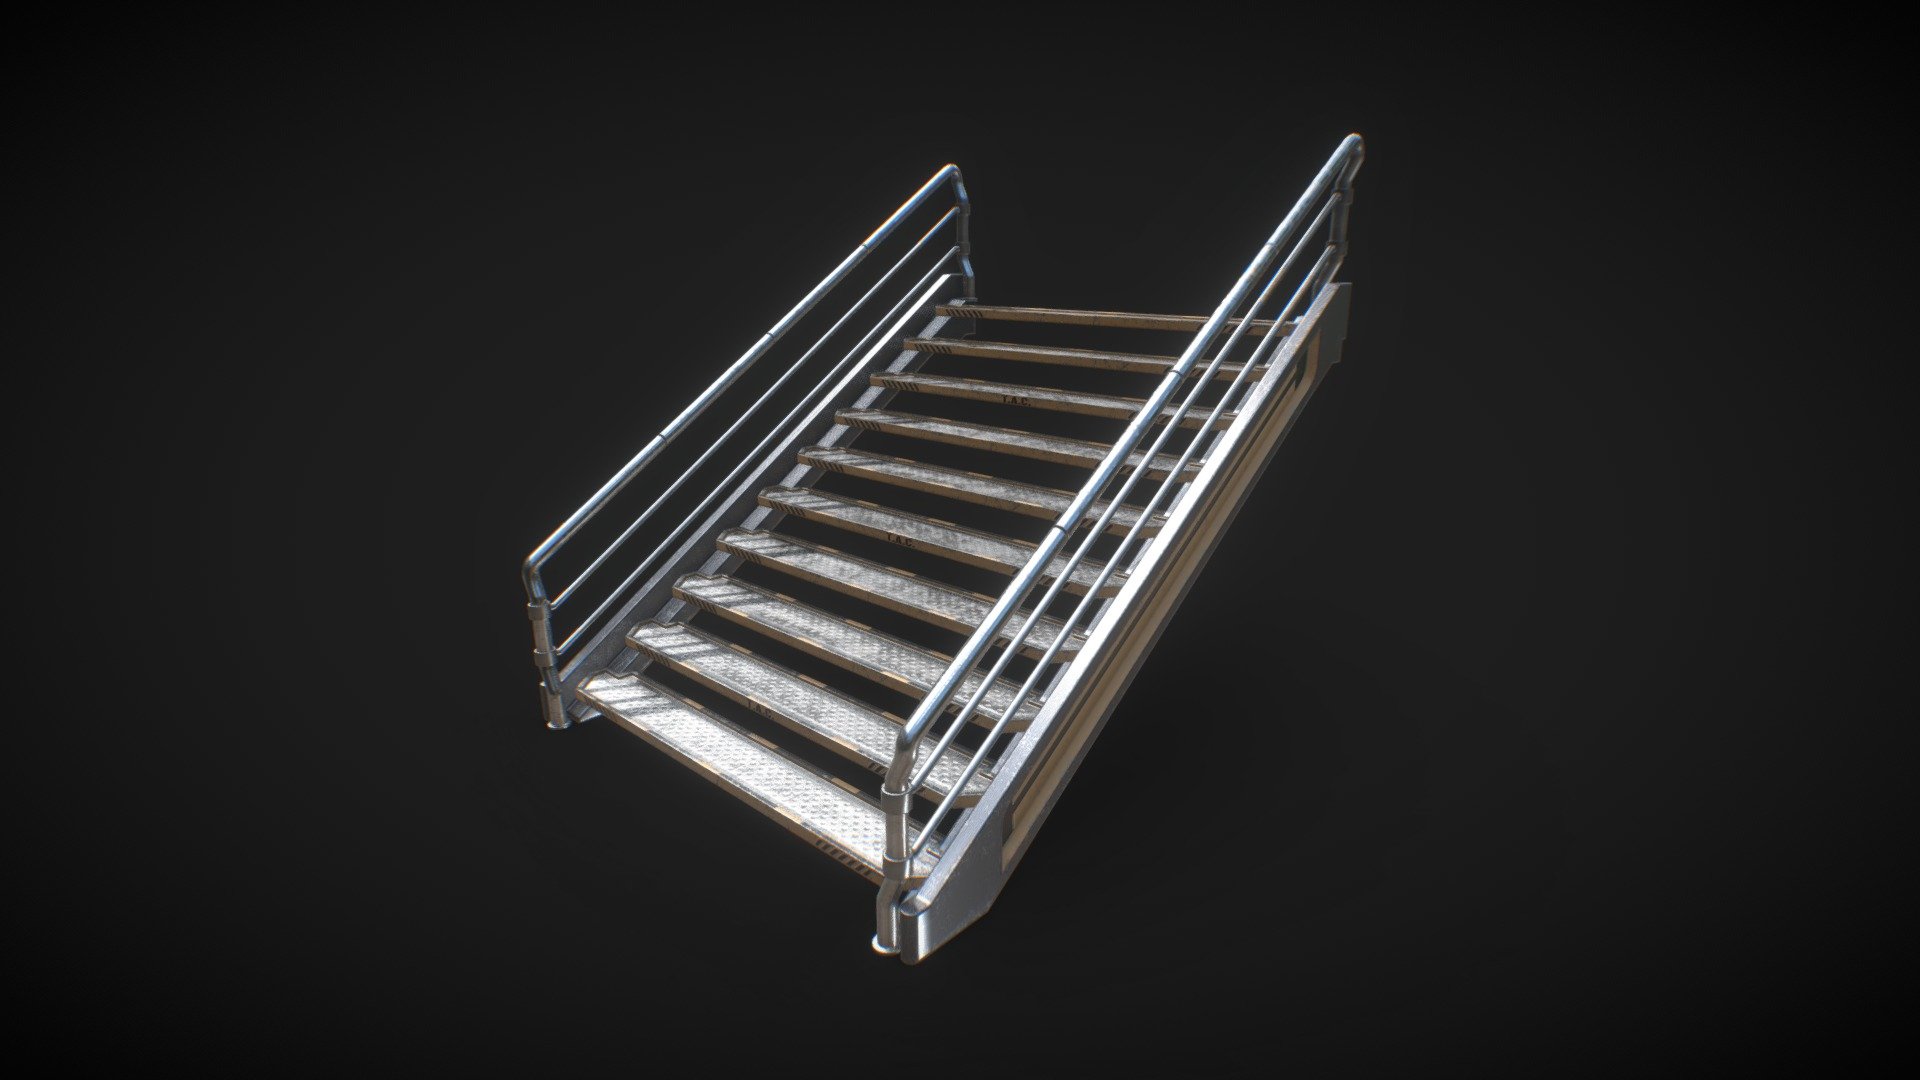 Game asset used in UNITY HDRP. Made with Blender, Substance Painter From my game: PLAHK - Stair platform - 3D model by Voltred 3d model